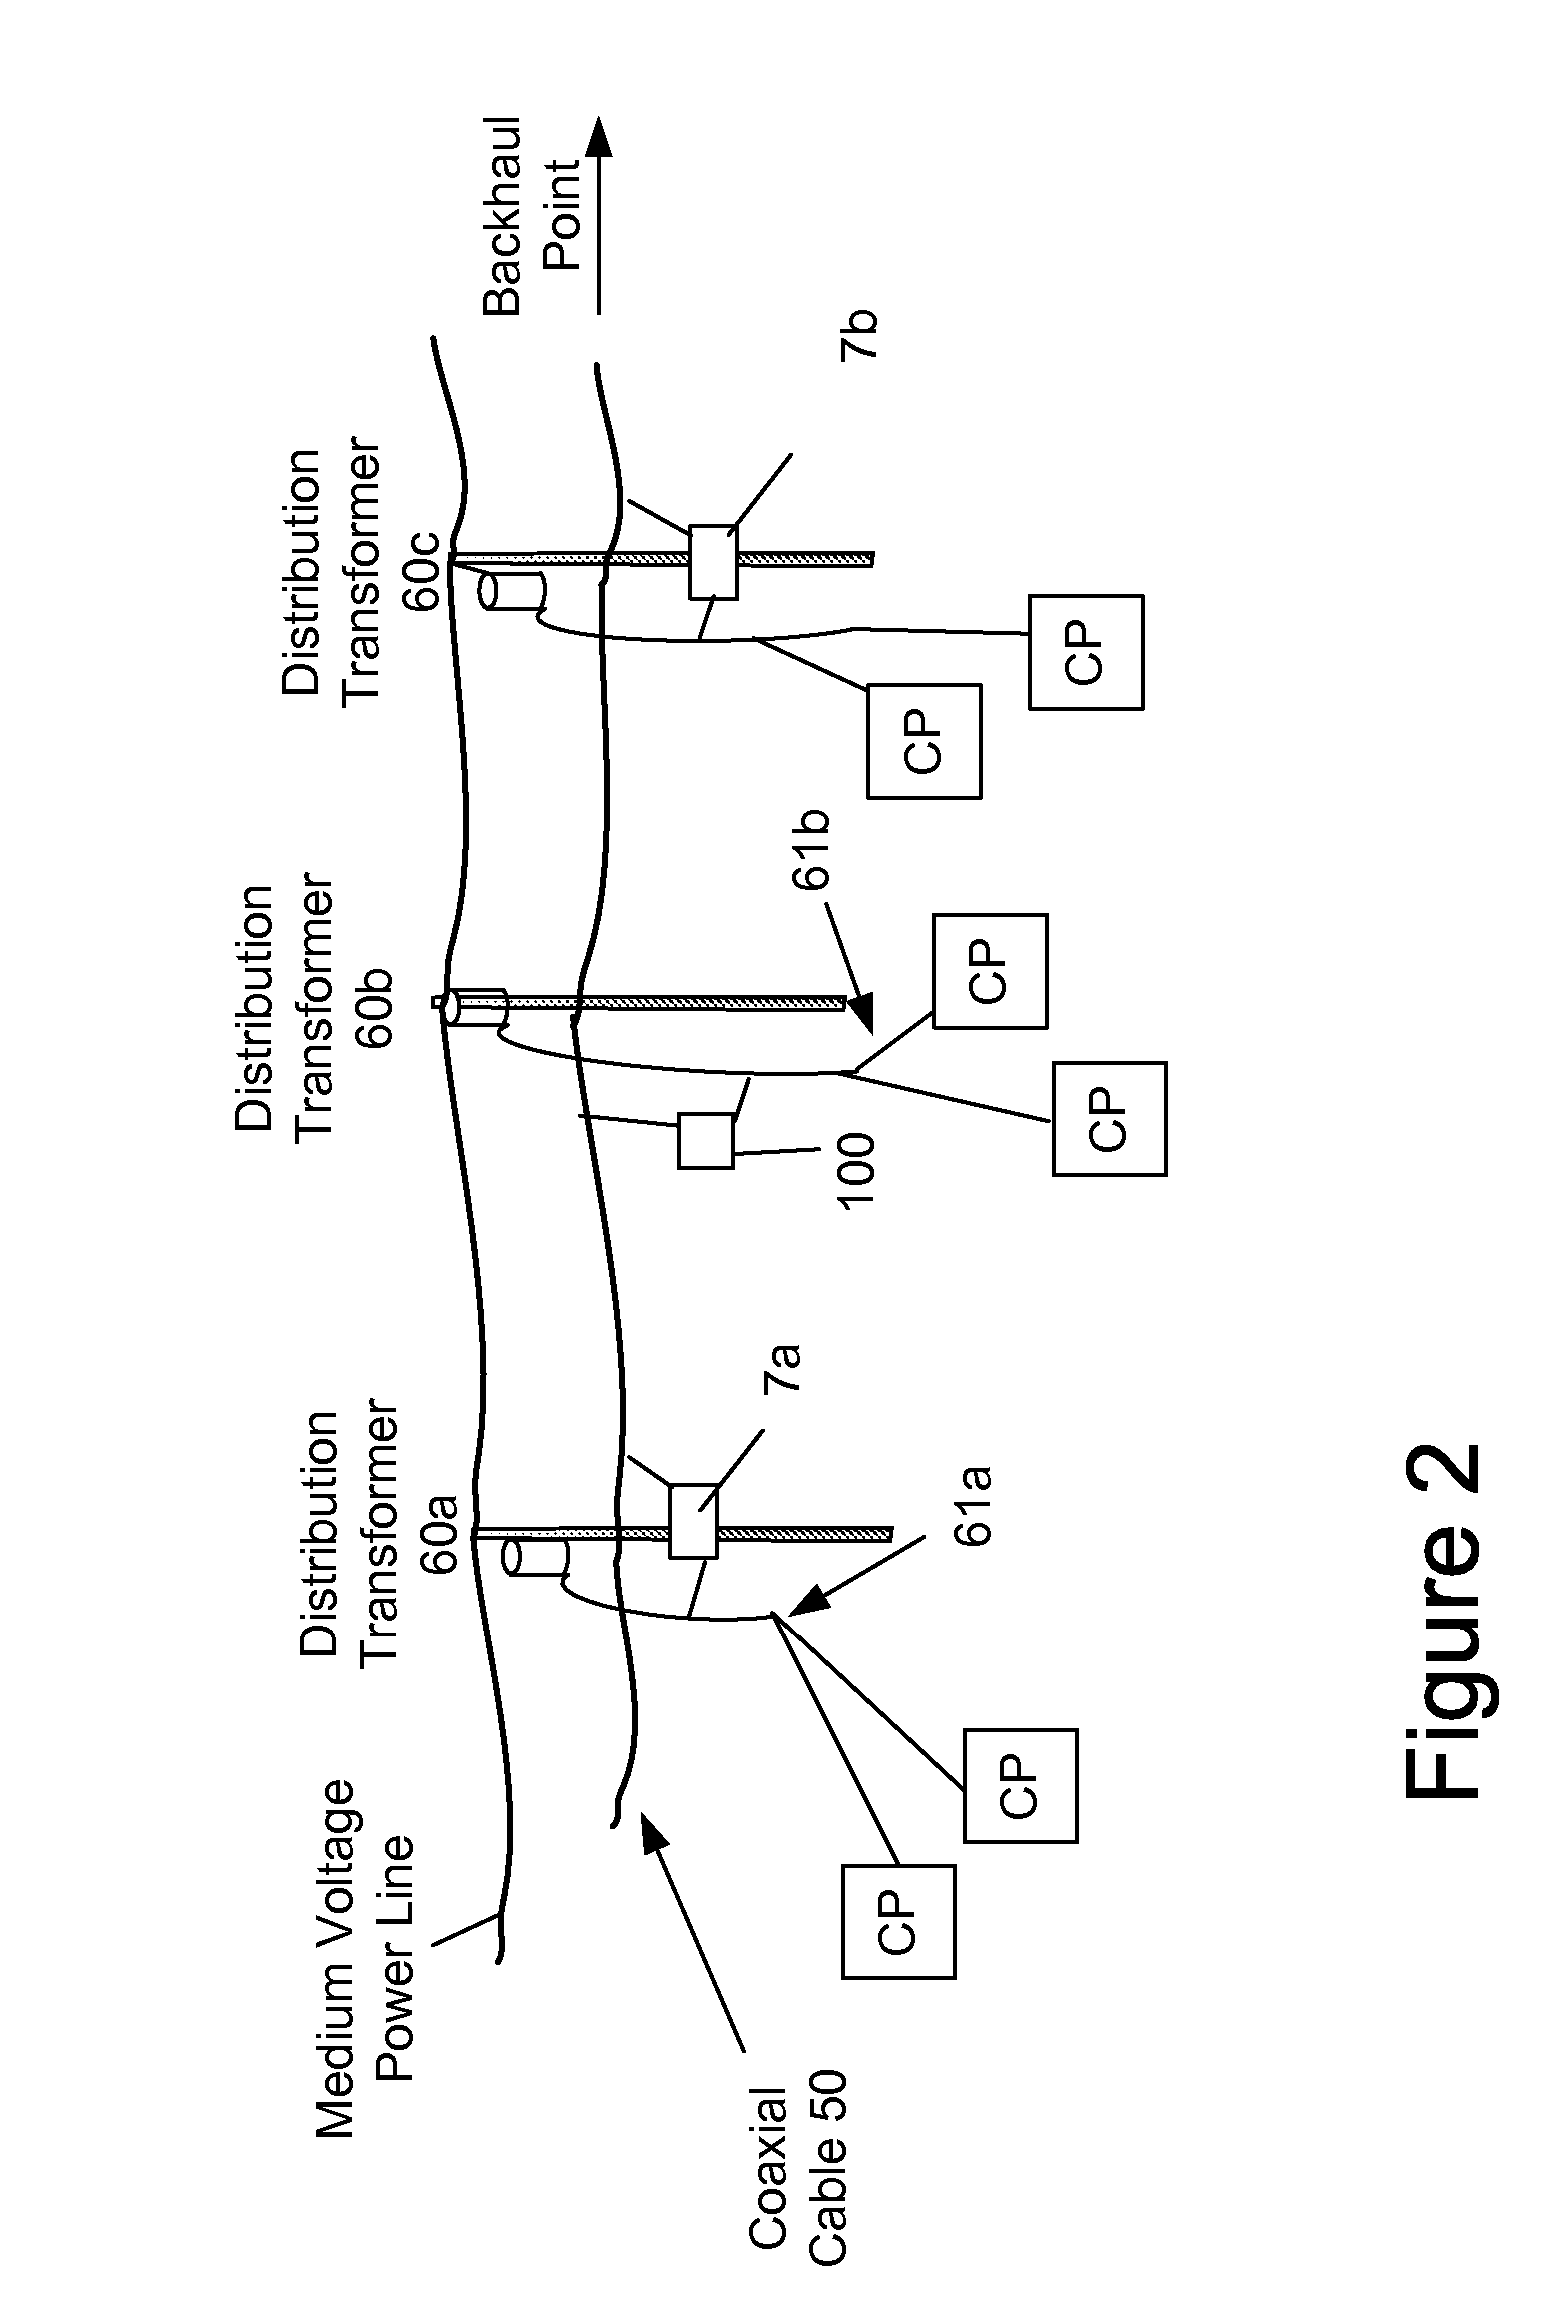 Power Line Communication System and Method